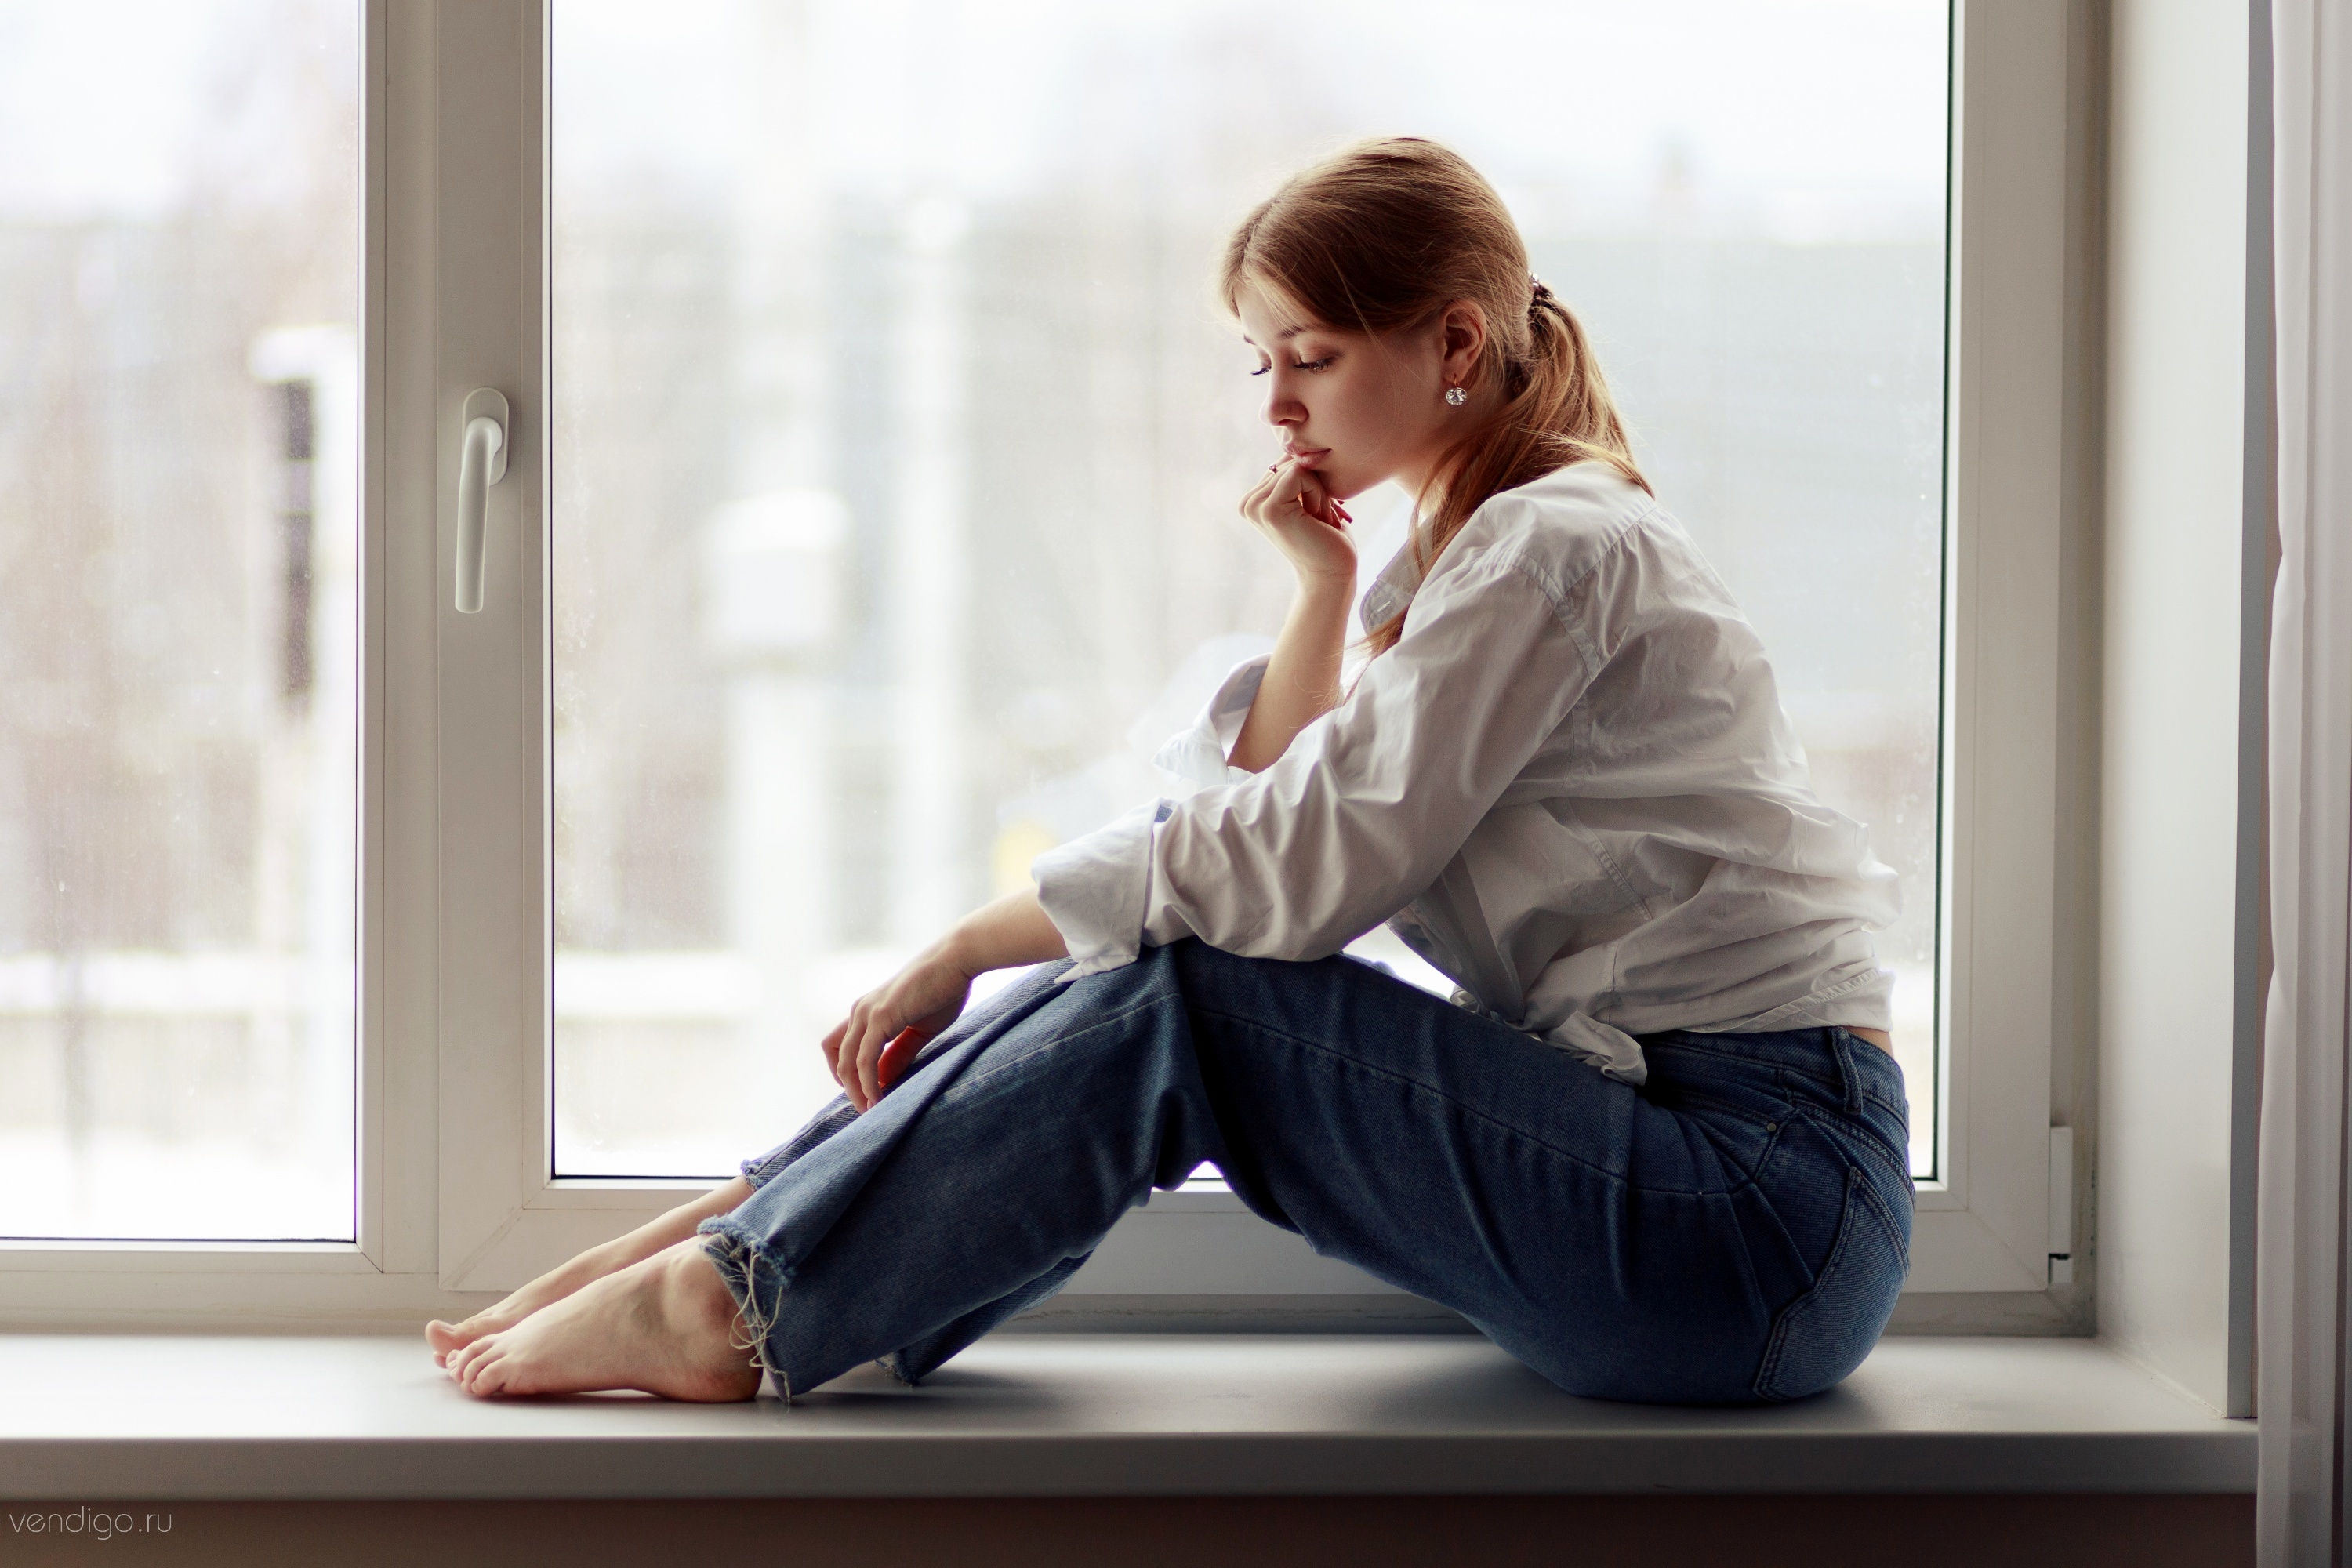 Model Red Lipstick White Shirt Jeans Barefoot Sitting By The Window Hand On Face Women 3000x2000